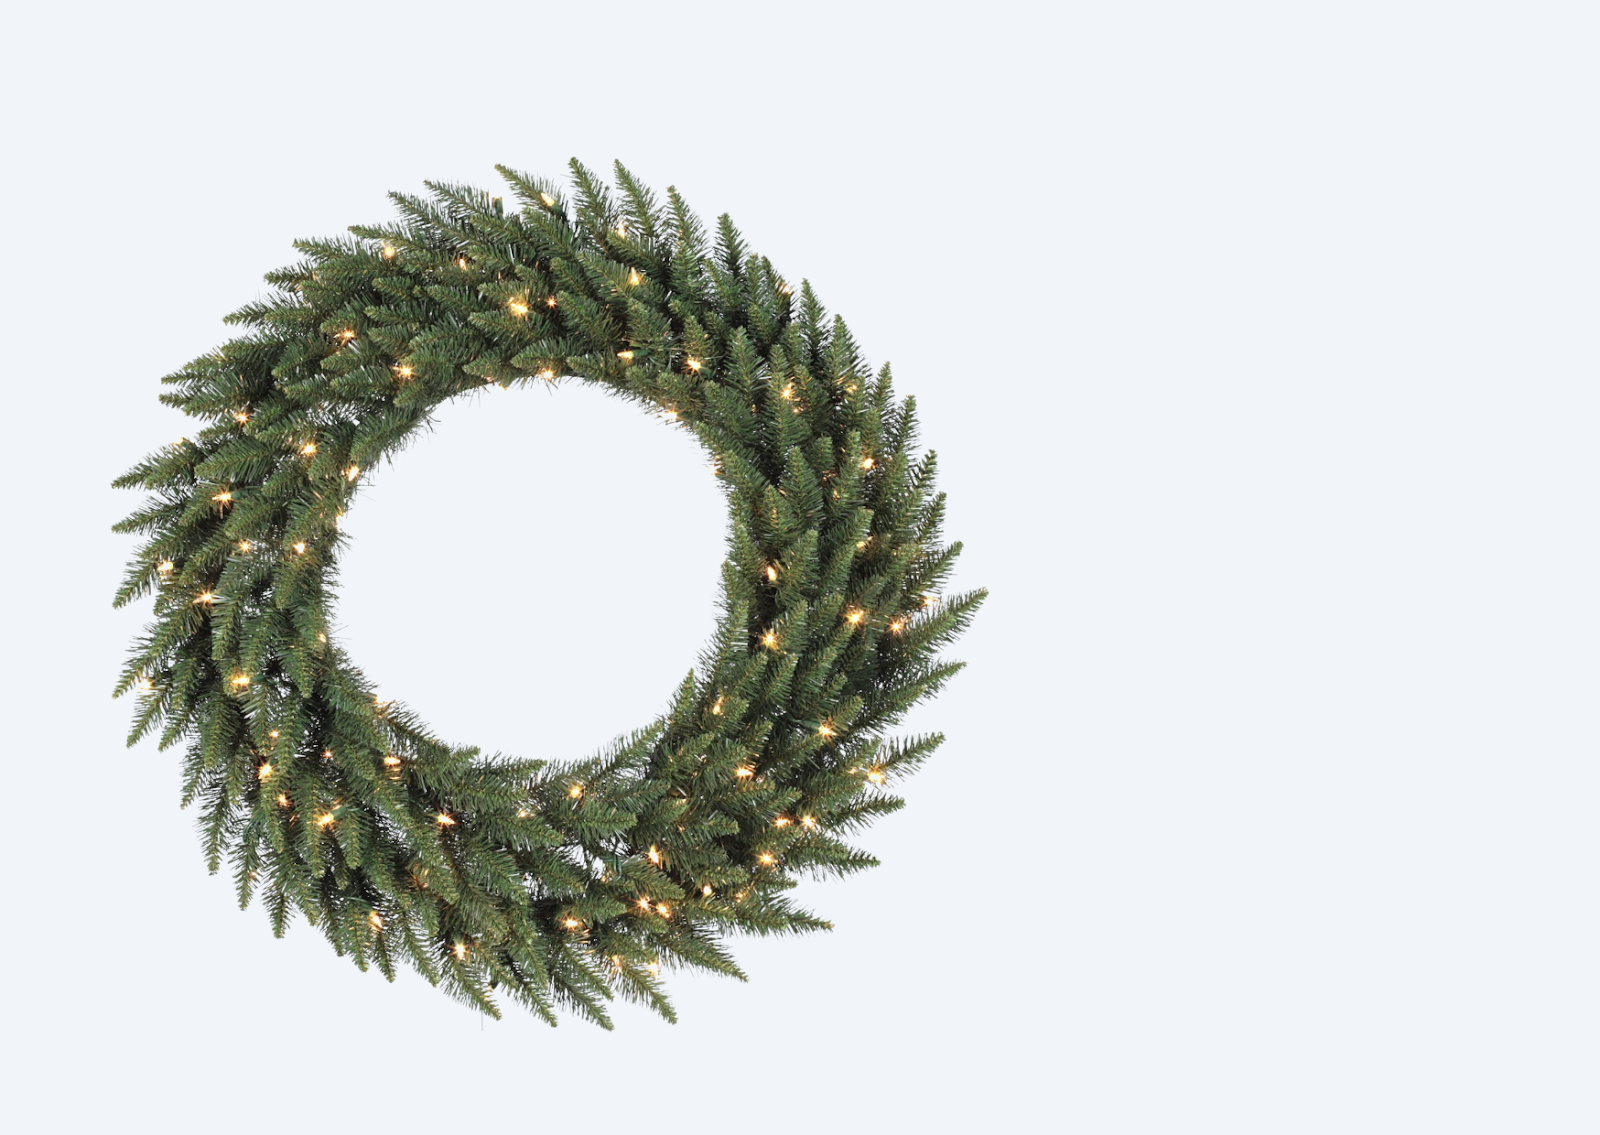 Illuminate your space with the Wreath w/ Clear Dura-lit Incandescent Lights 46". A festive masterpiece adorned with twinkling lights, adding a warm and magical glow to your holiday decor.